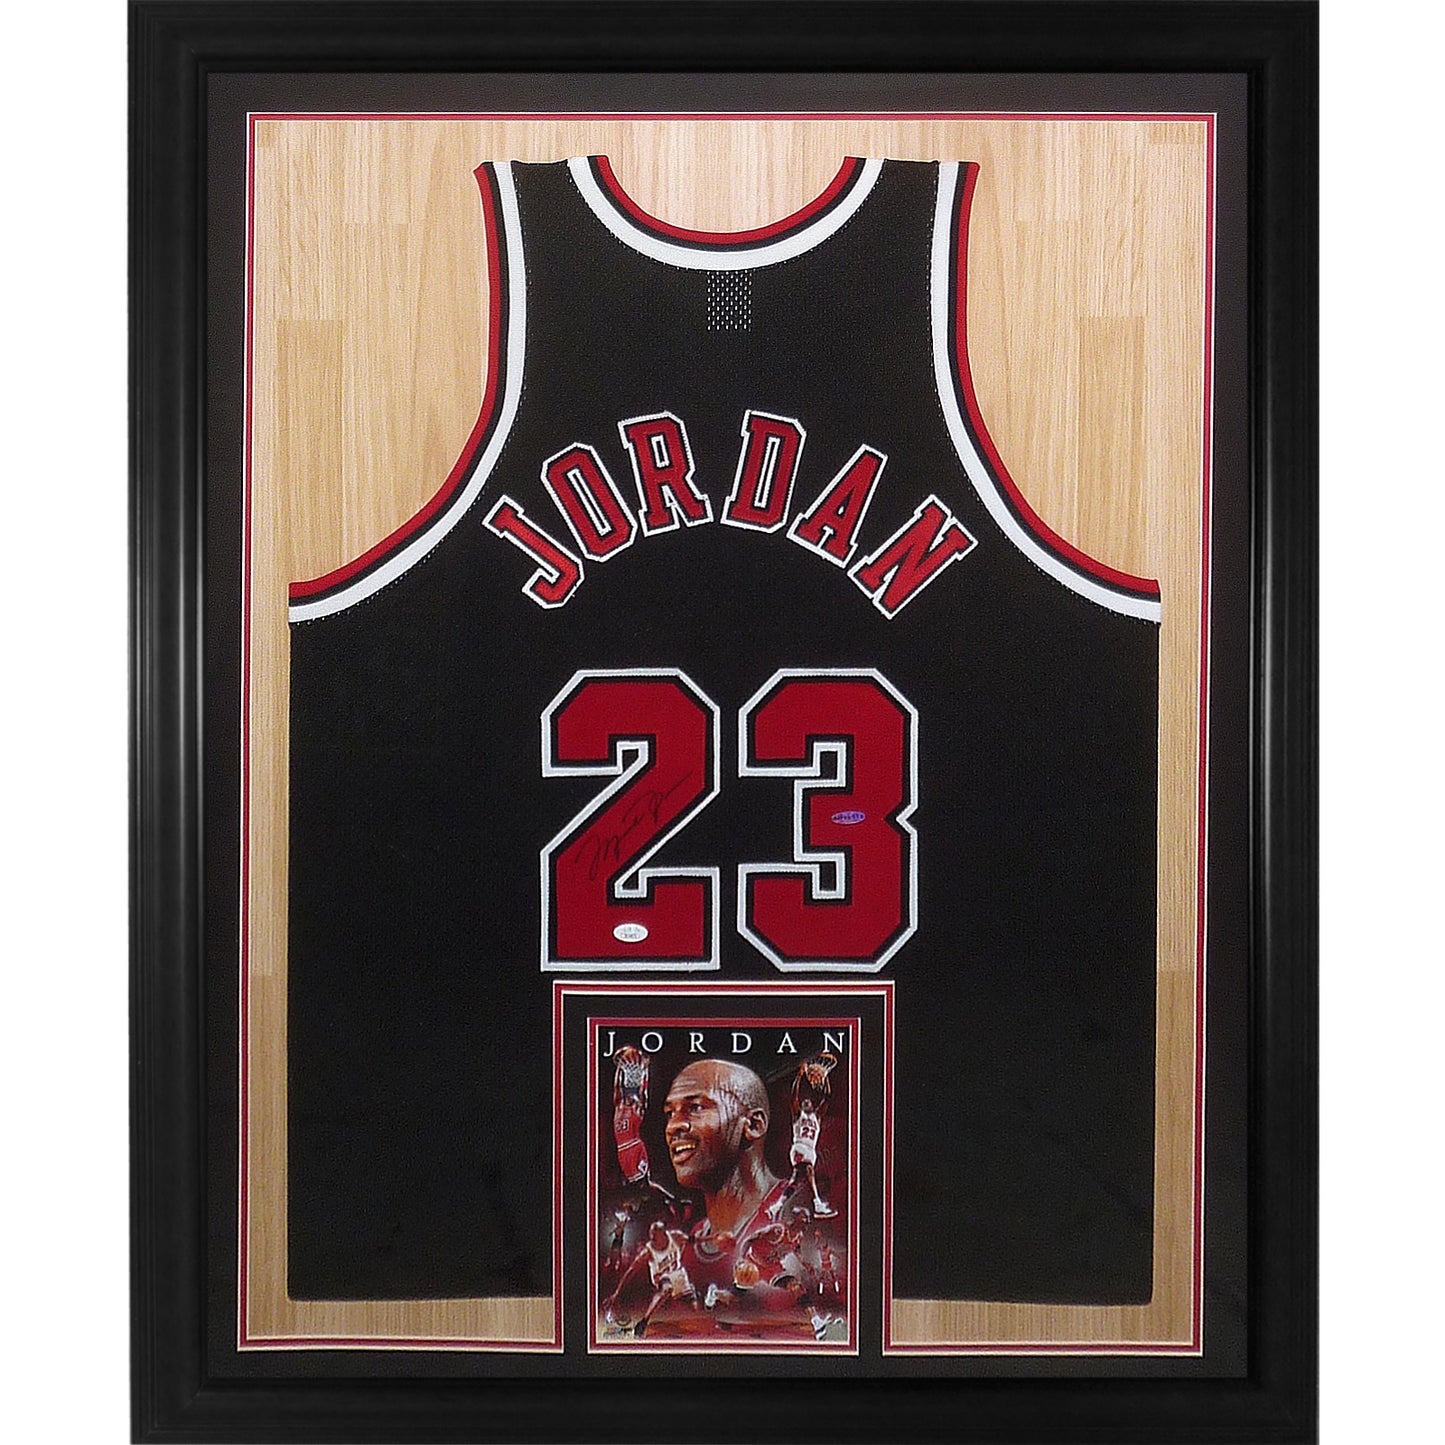 Michael Jordan Chicago Bulls Autographed White Nike Jersey with